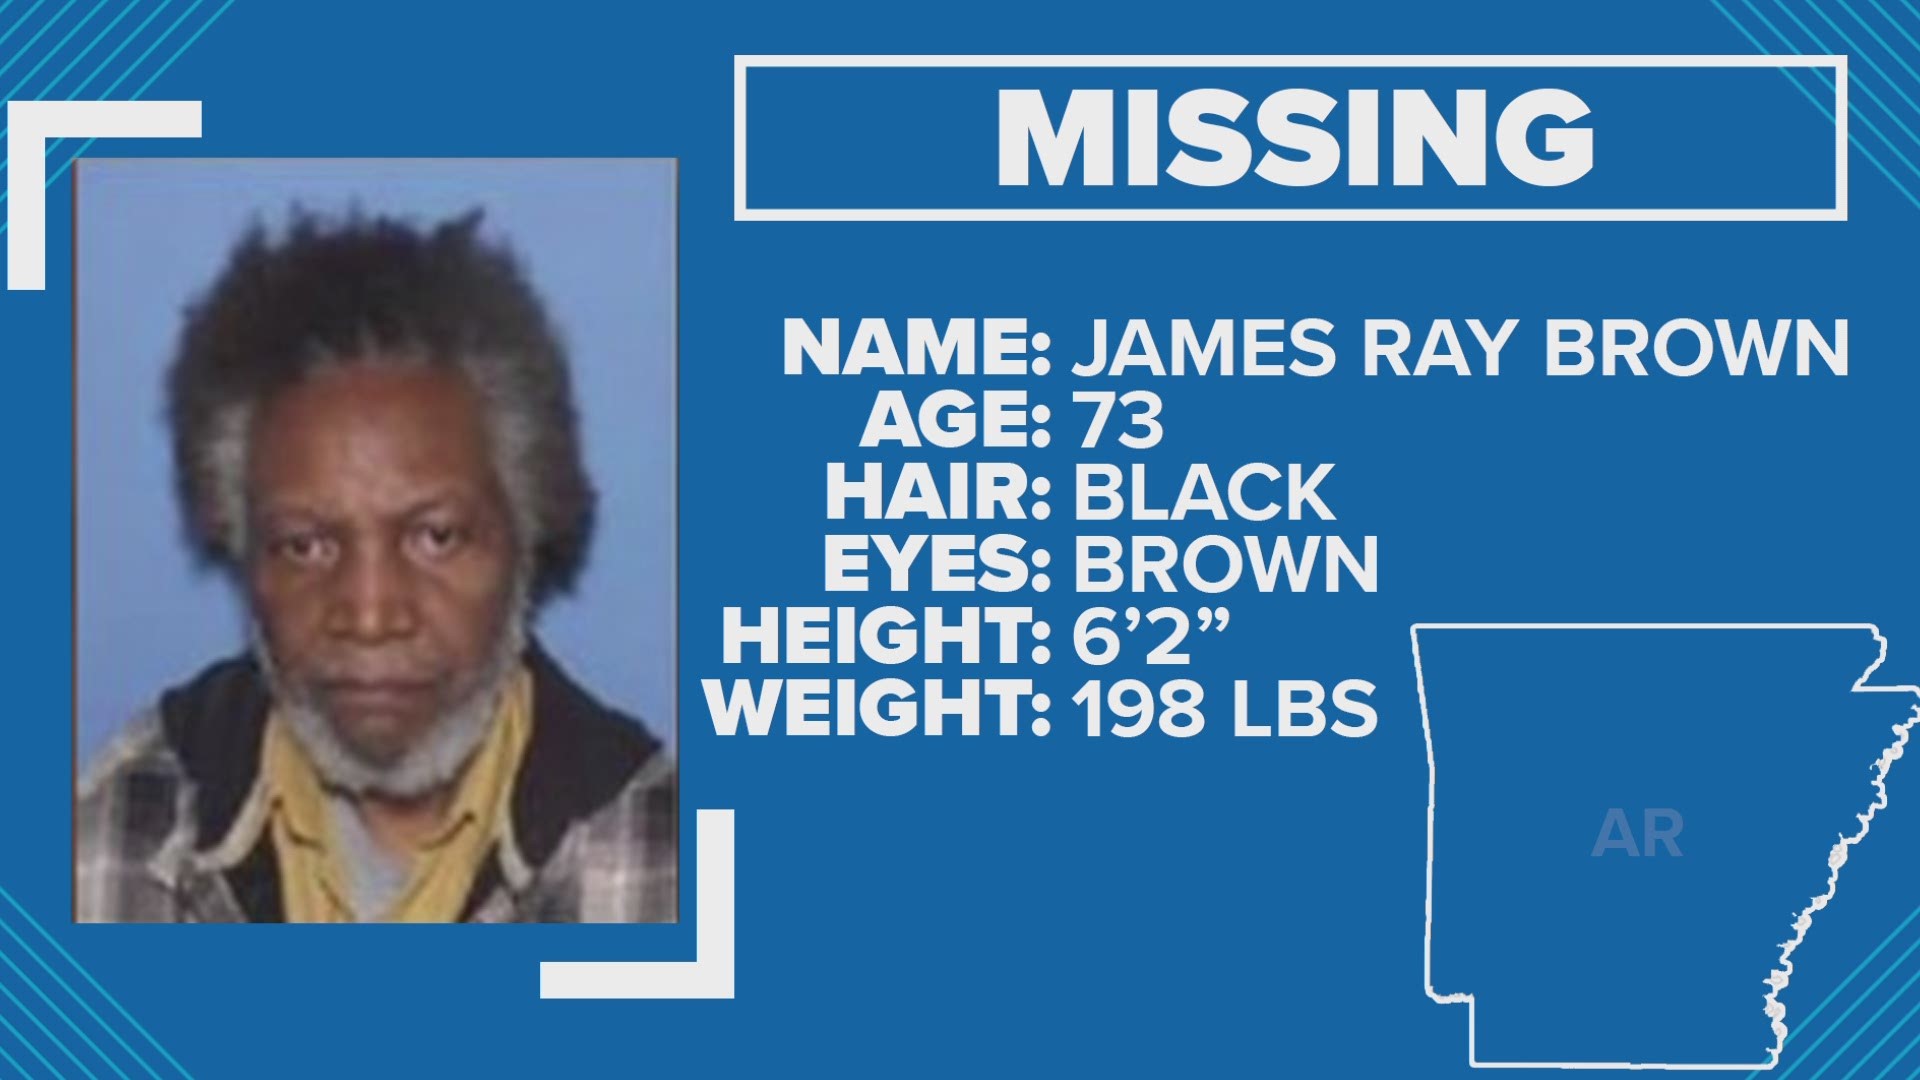 A homeless man in Arkansas is missing.